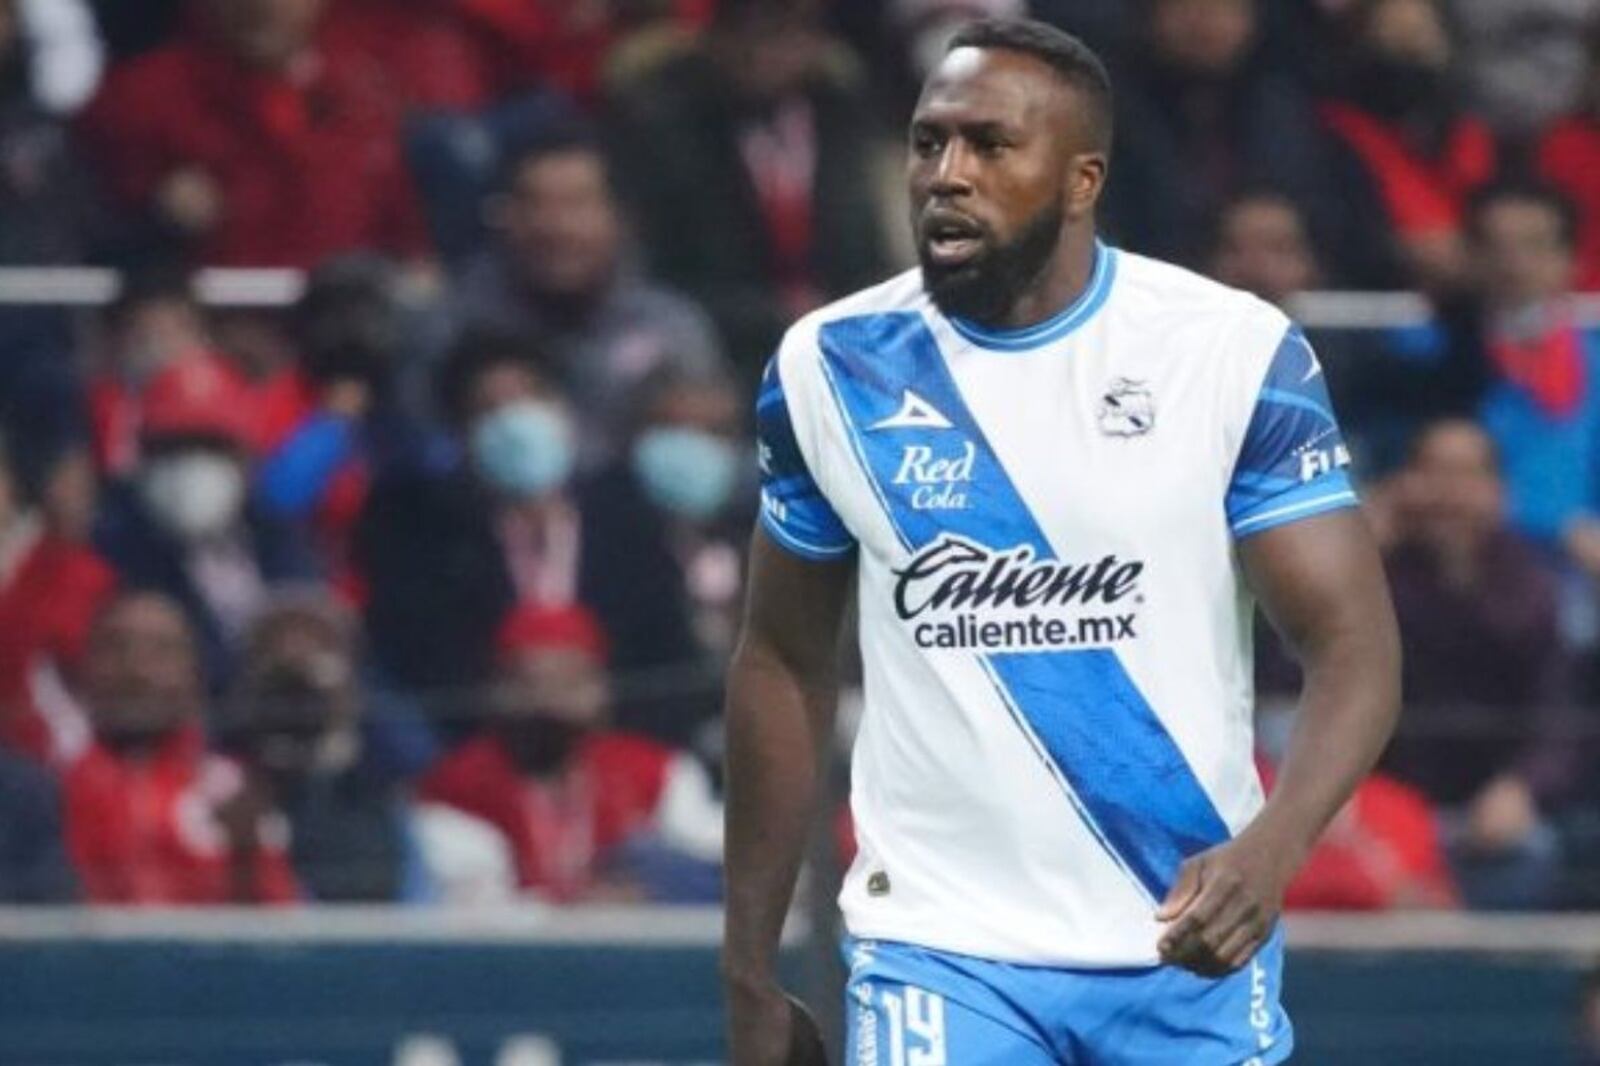 Jozy Altidore has barely played a game in Puebla and his coach fired him for this reason